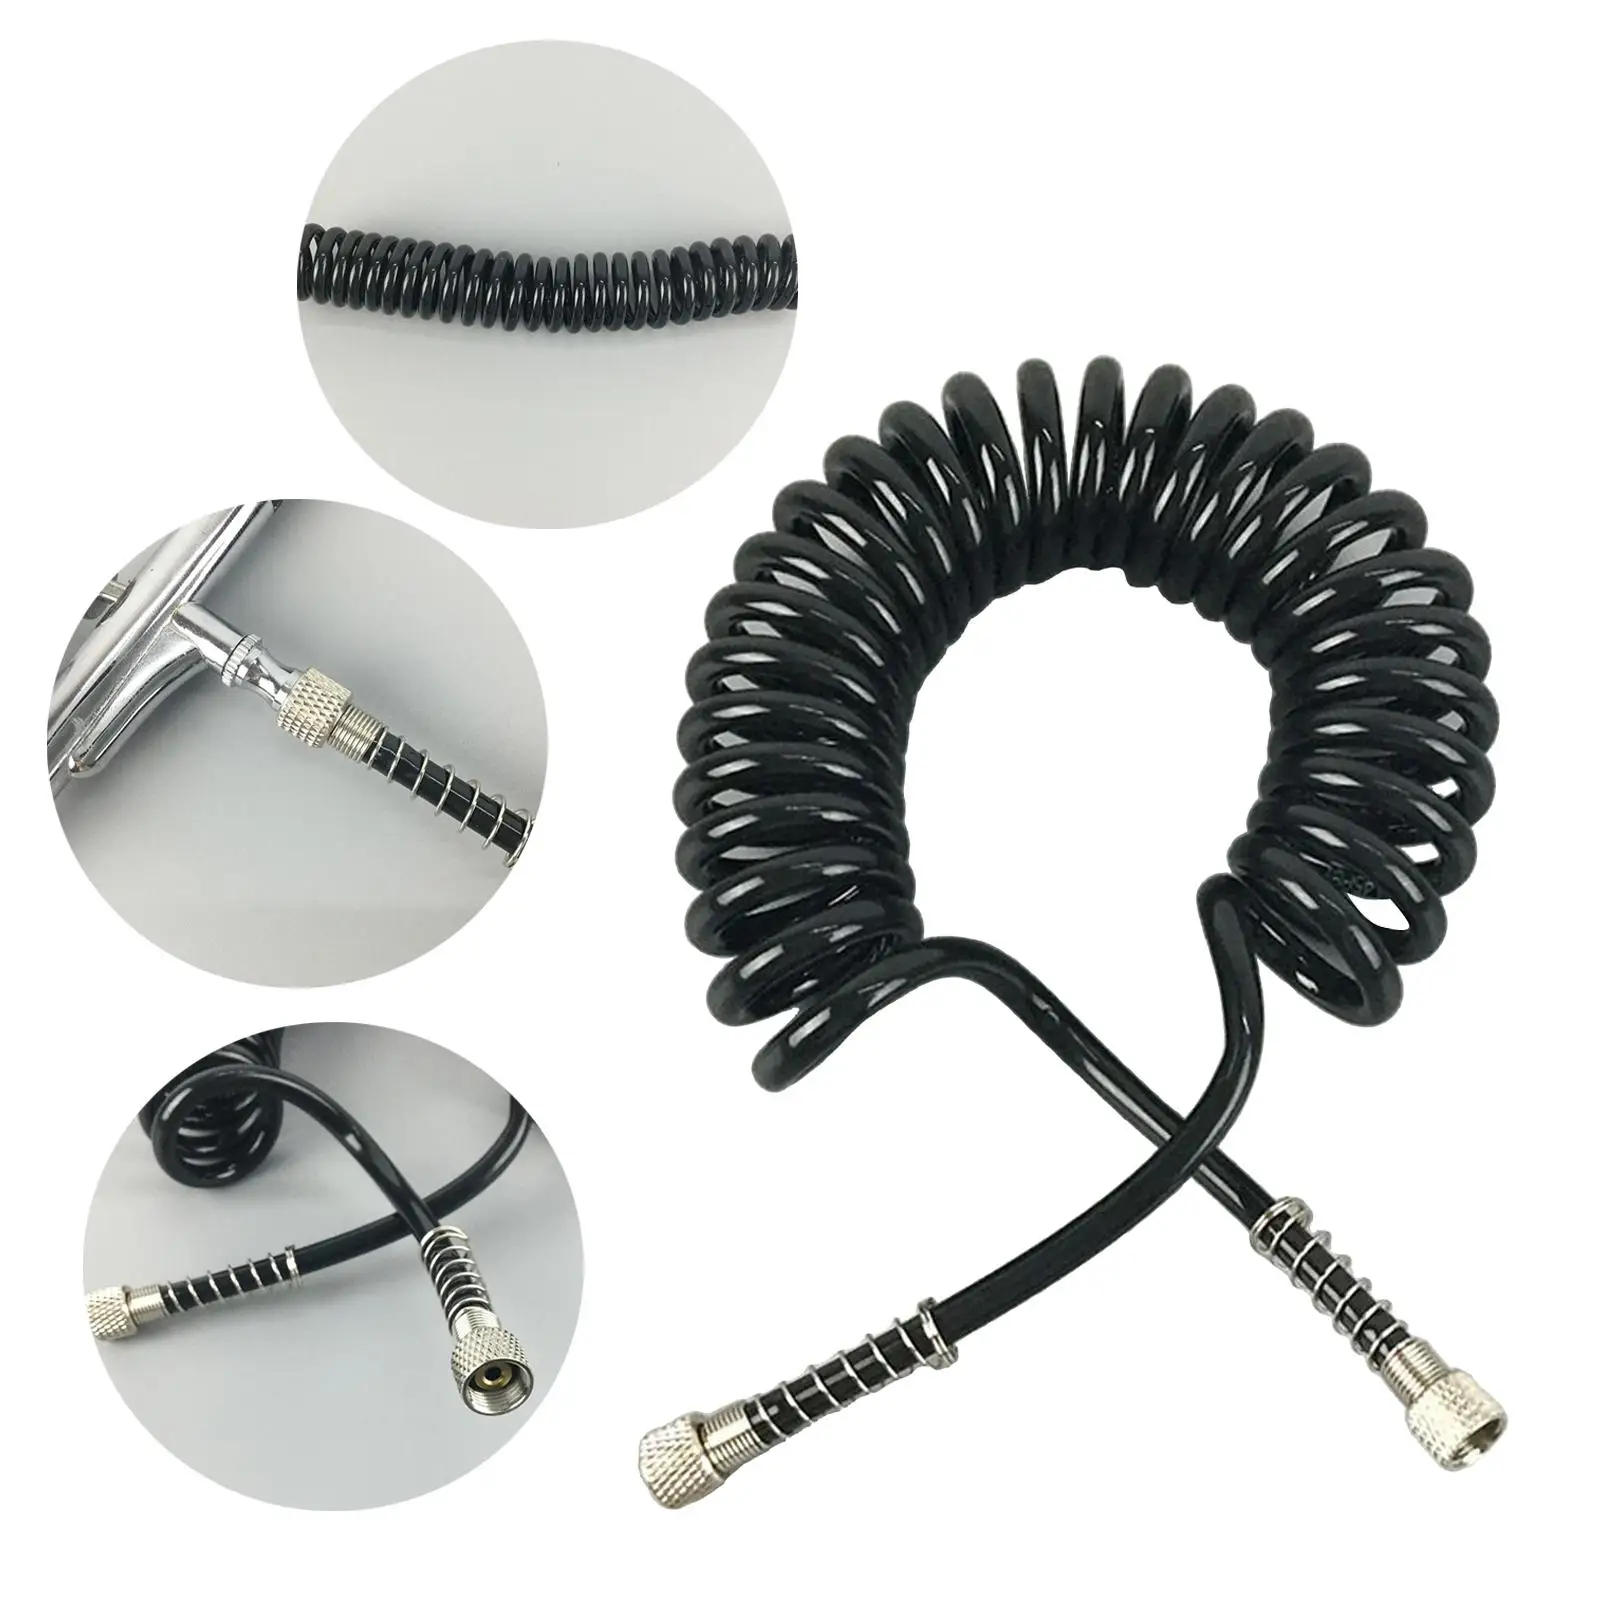 Airbrush Air Hose Leak-Proof Retractable Spring Tube for Makeup Tattoo Nail Art Tool